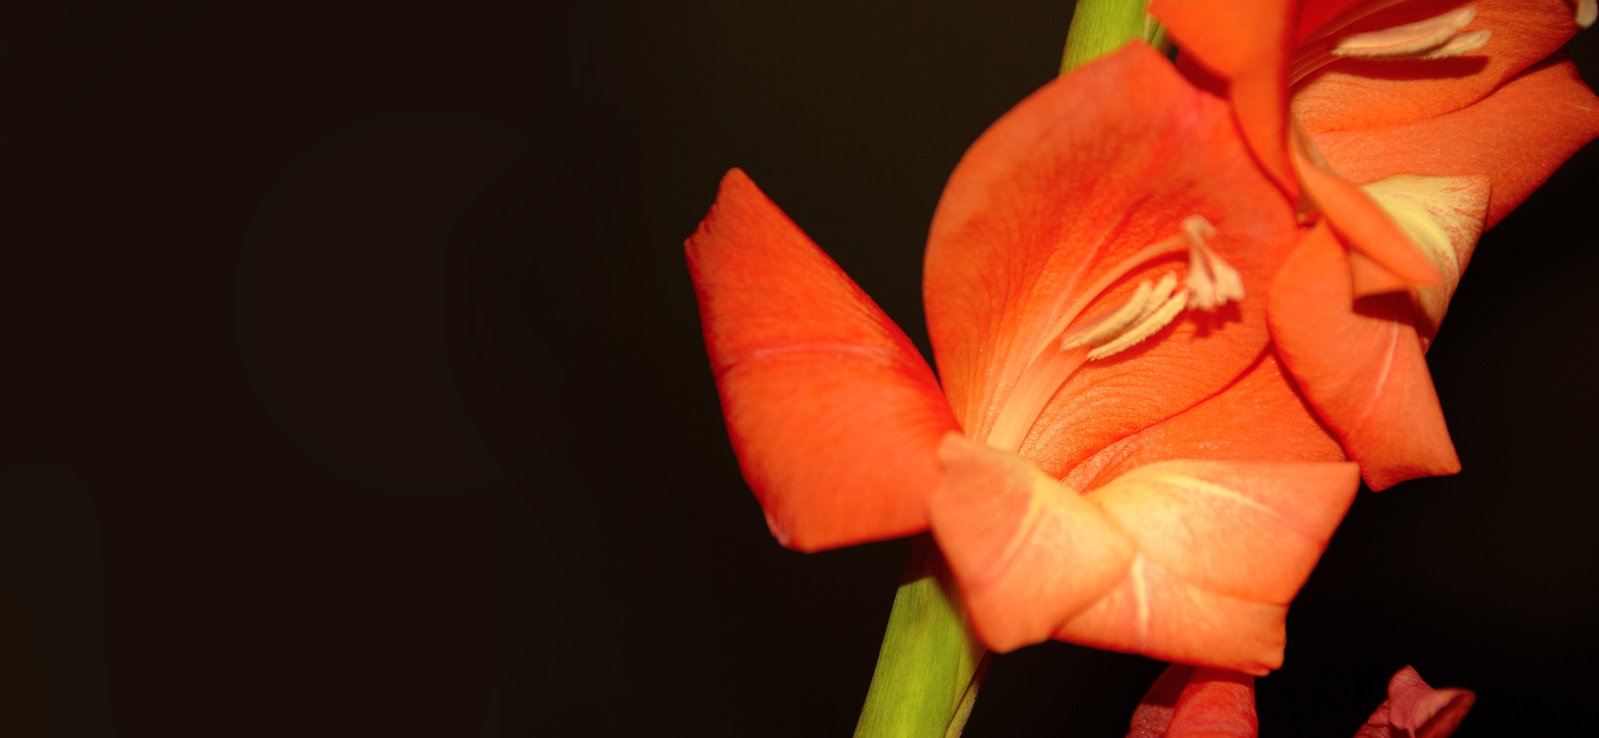 two bright orange flowers with one still bloom